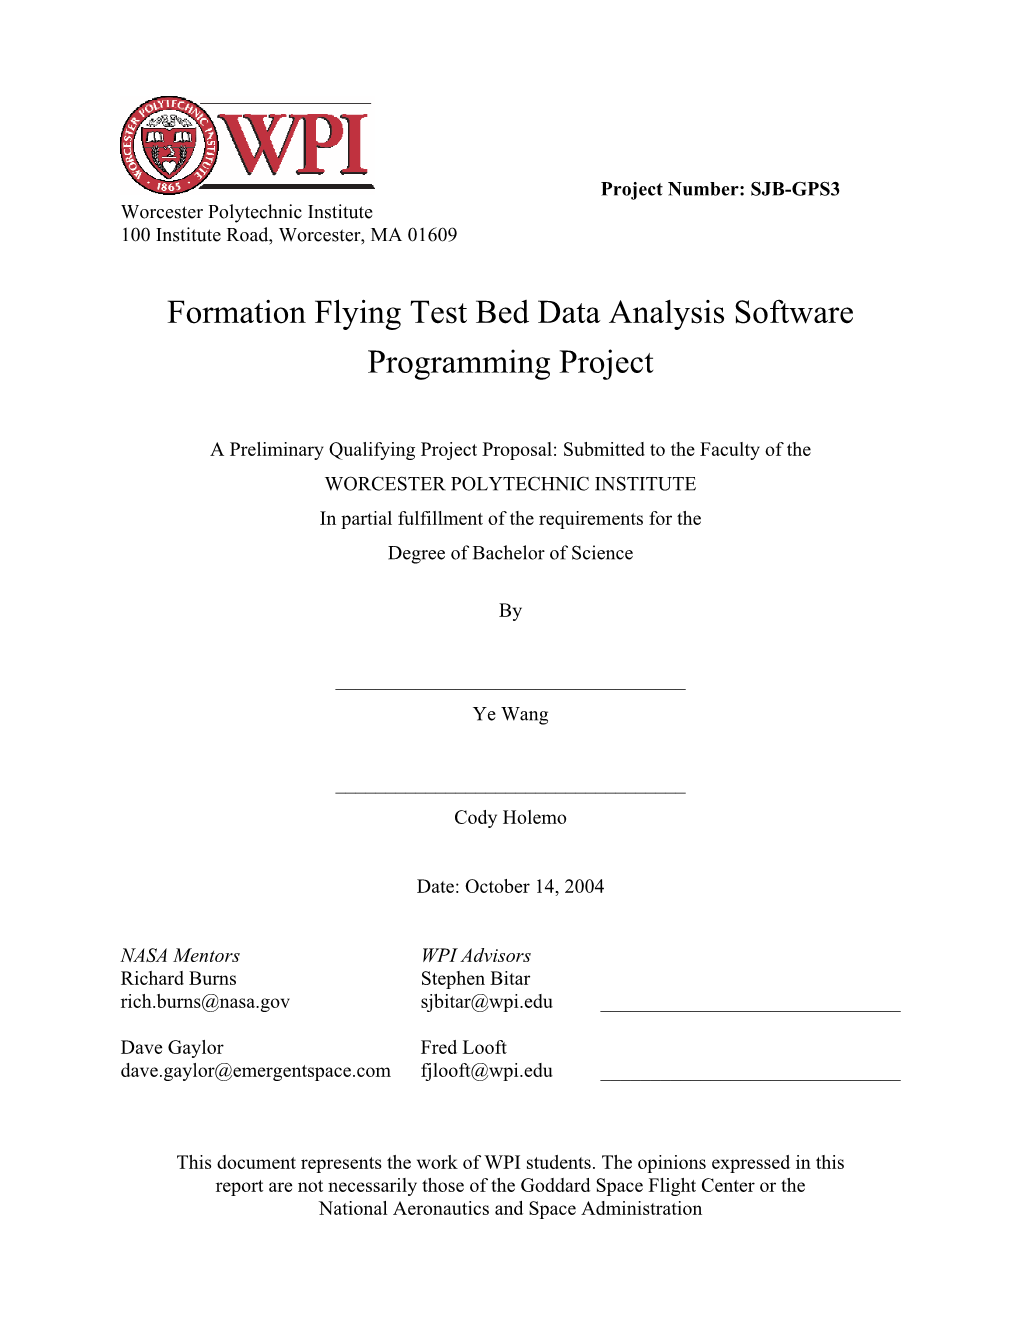 Formation Flying Test Bed Data Analysis Software Programming Project